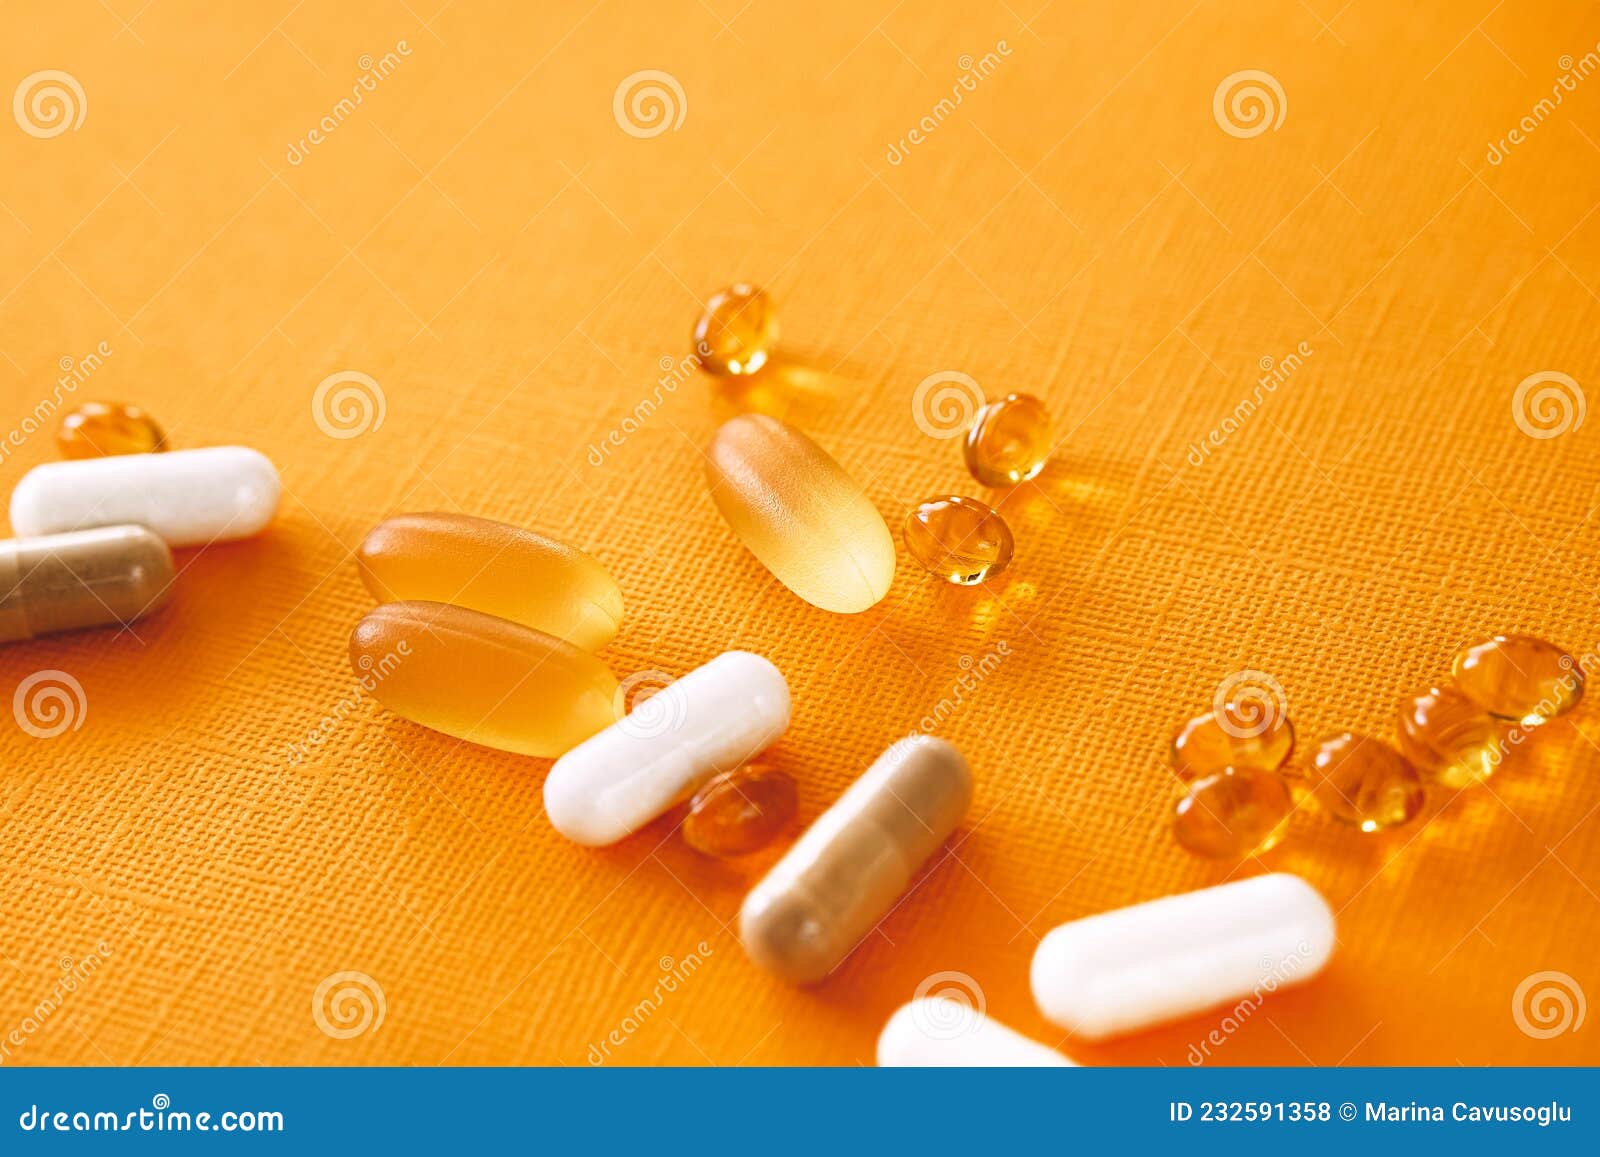 yellow capsules of nutraceuticals in spoon. pills and meds.